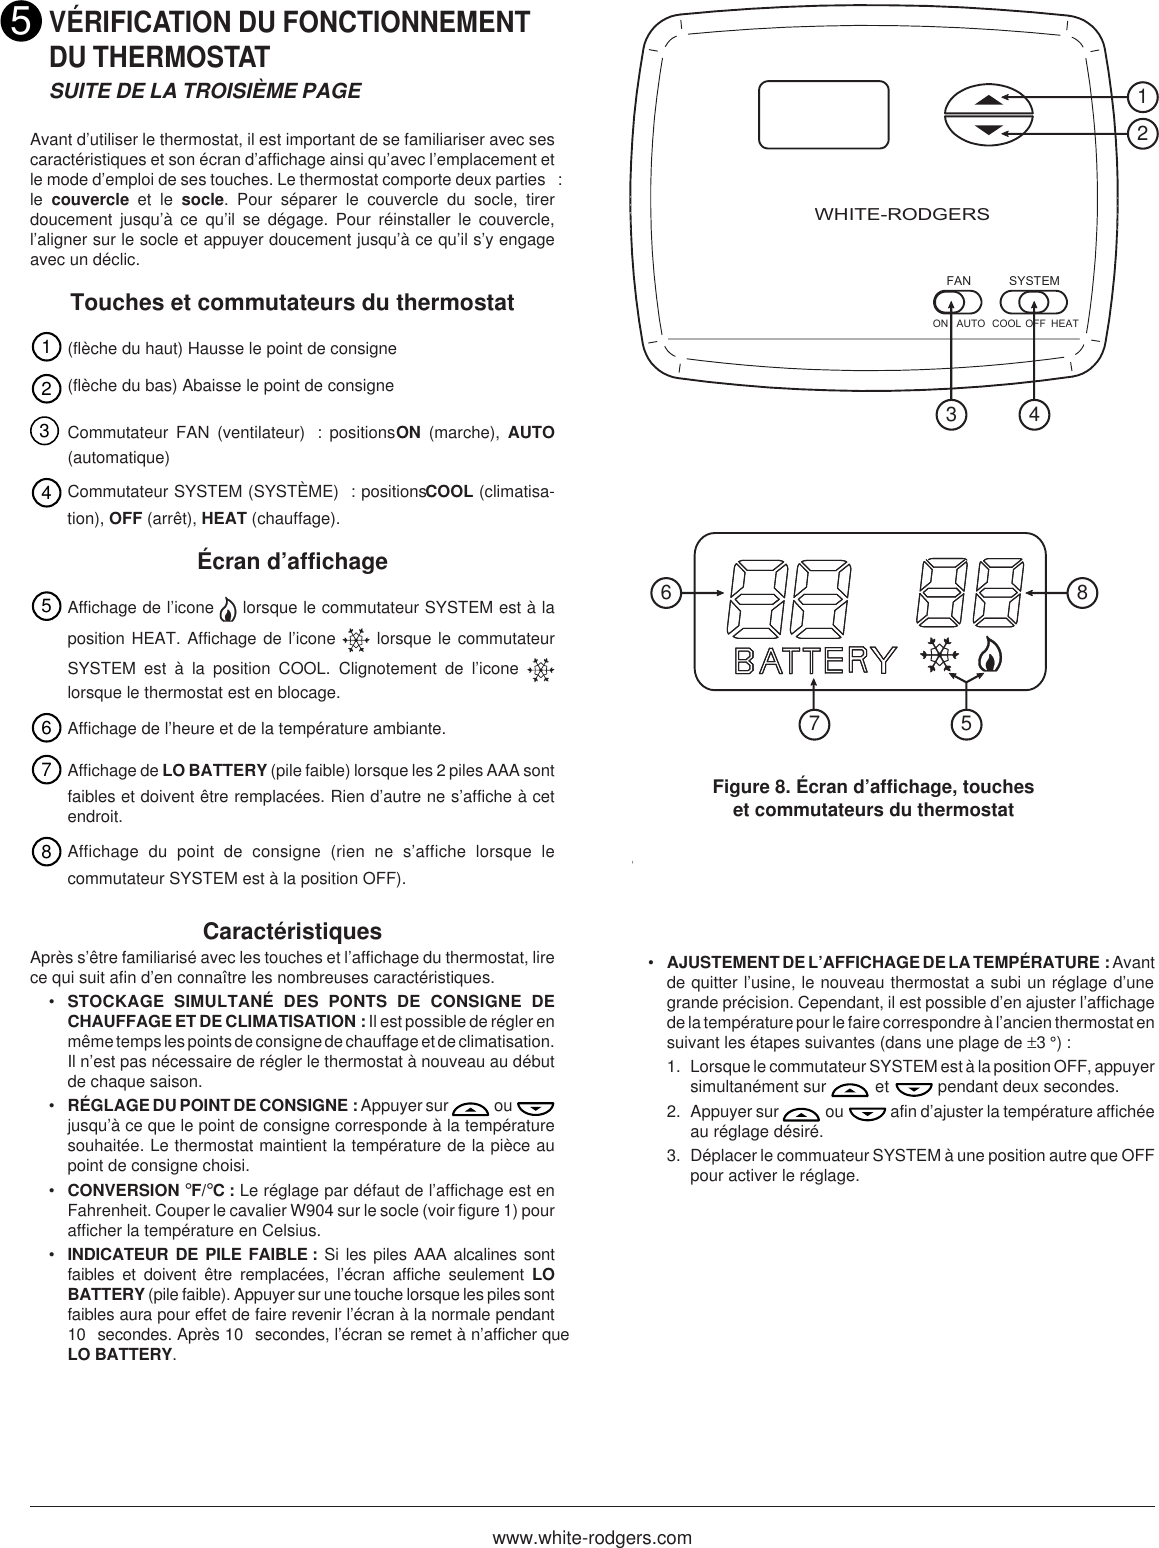 Page 4 of 6 - White-Rodgers White-Rodgers-1F78-144-White-Rodgers-70-Series-Non-Programmable-Single-Stage-Thermostat-Installation-And-Operation-Instructions- 1F78-144 (37-6194A)-fr  White-rodgers-1f78-144-white-rodgers-70-series-non-programmable-single-stage-thermostat-installation-and-operation-instructions